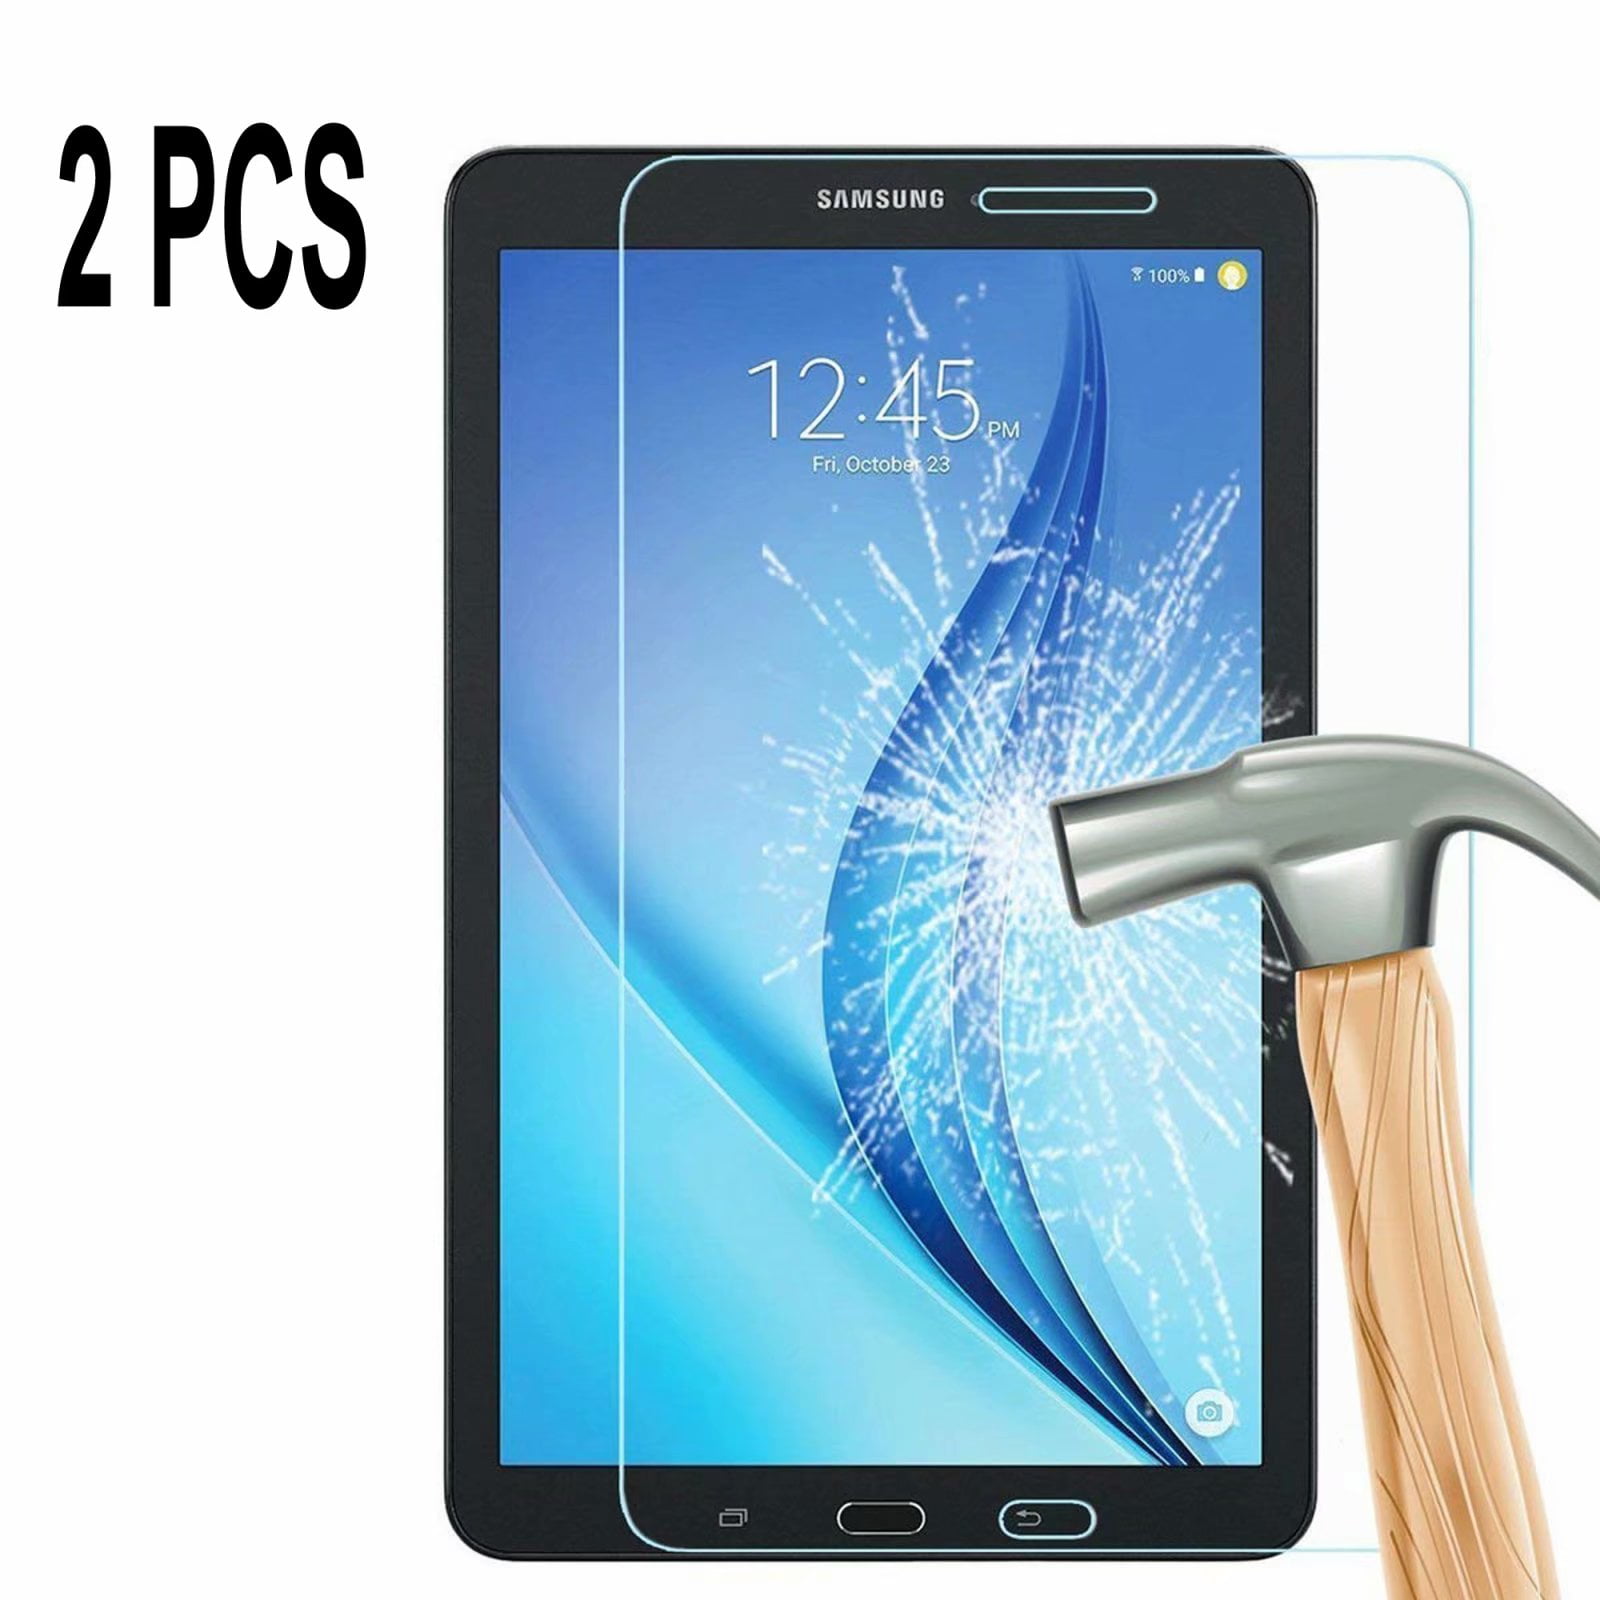 2PCS Tempered Glass Screen Protector Film For Samsung Galaxy Tab E 8.0 T377 T375 